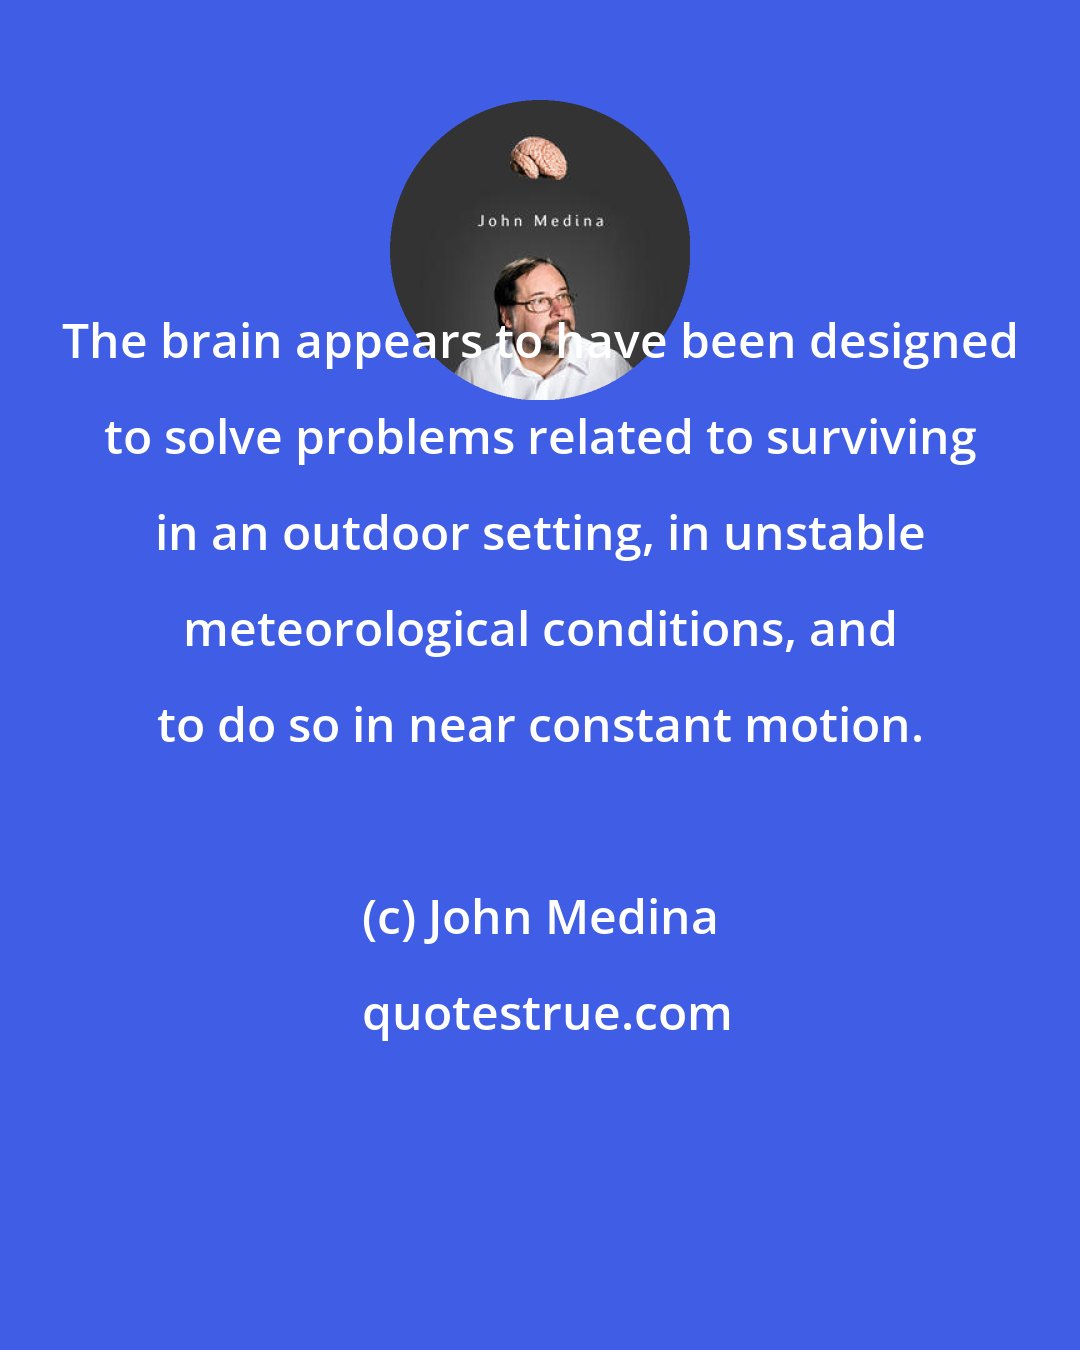 John Medina: The brain appears to have been designed to solve problems related to surviving in an outdoor setting, in unstable meteorological conditions, and to do so in near constant motion.